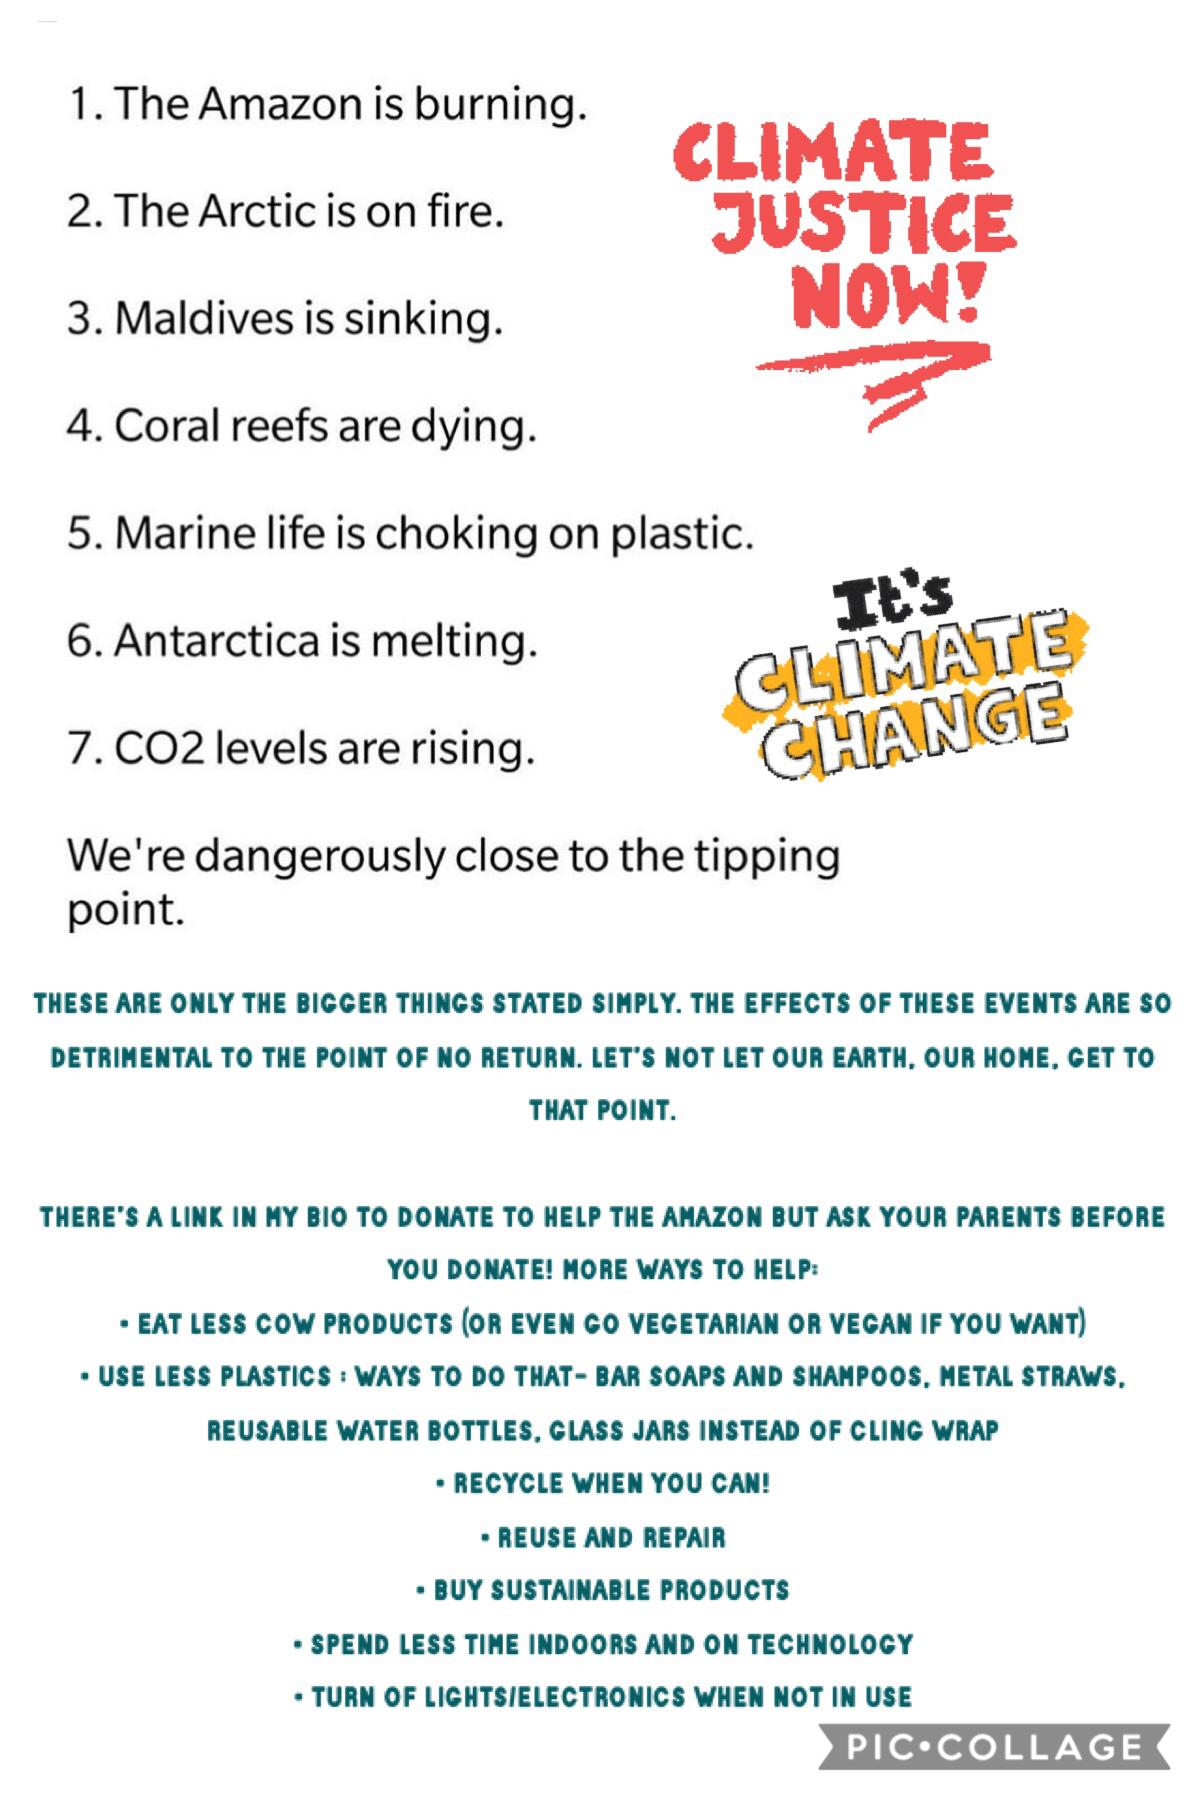 comment your own ways you are combatting climate change! you do not have to do all of these, but try to do as much as you can. we need more people living sustainably imperfectly than a few living sustainably perfectly